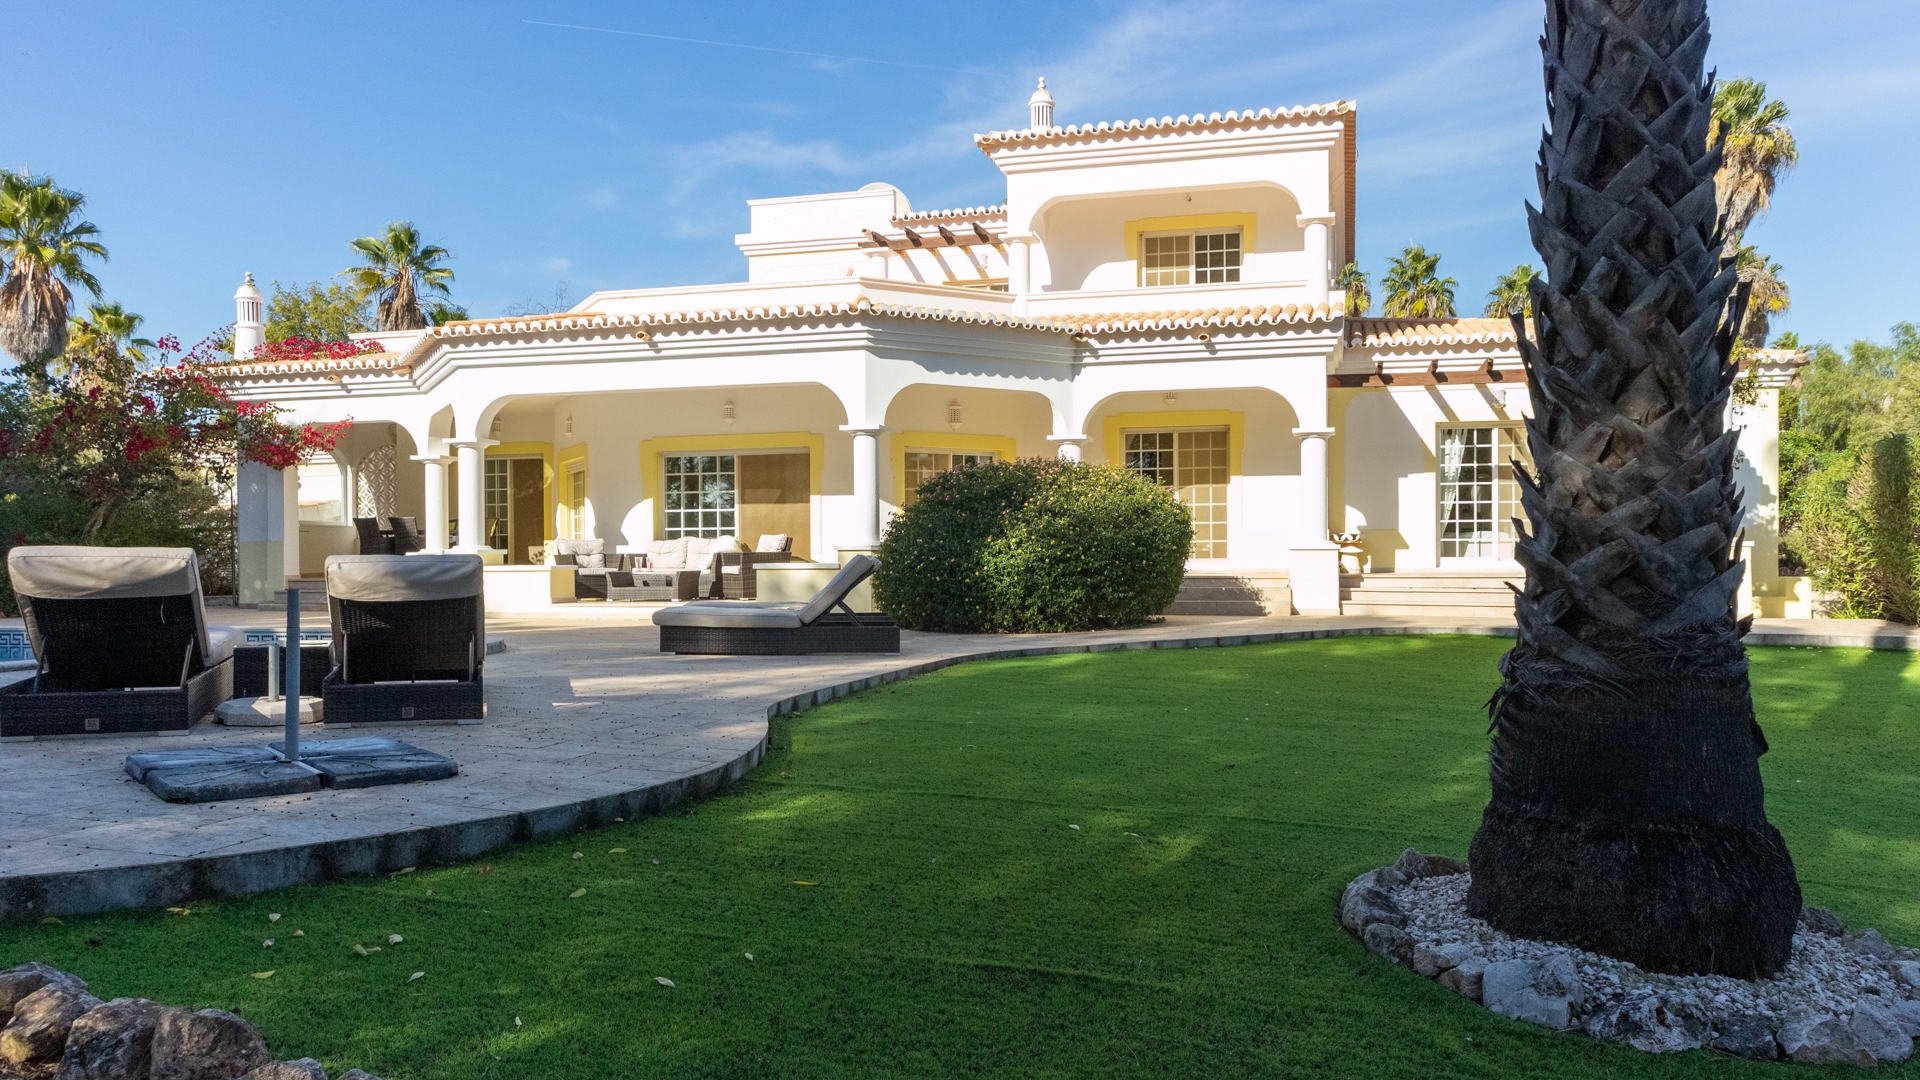 Spacious 4 Bedroom Villa on Large Plot with Pool on Golf Course, Alvor | LG1878 Detached 4 bedroom villa with 4 en-suite bathrooms and large pool, right on a golf course and close to long sandy beaches. Perfect as a permanent residence, own holiday property or for holiday rentals, in Alvor.